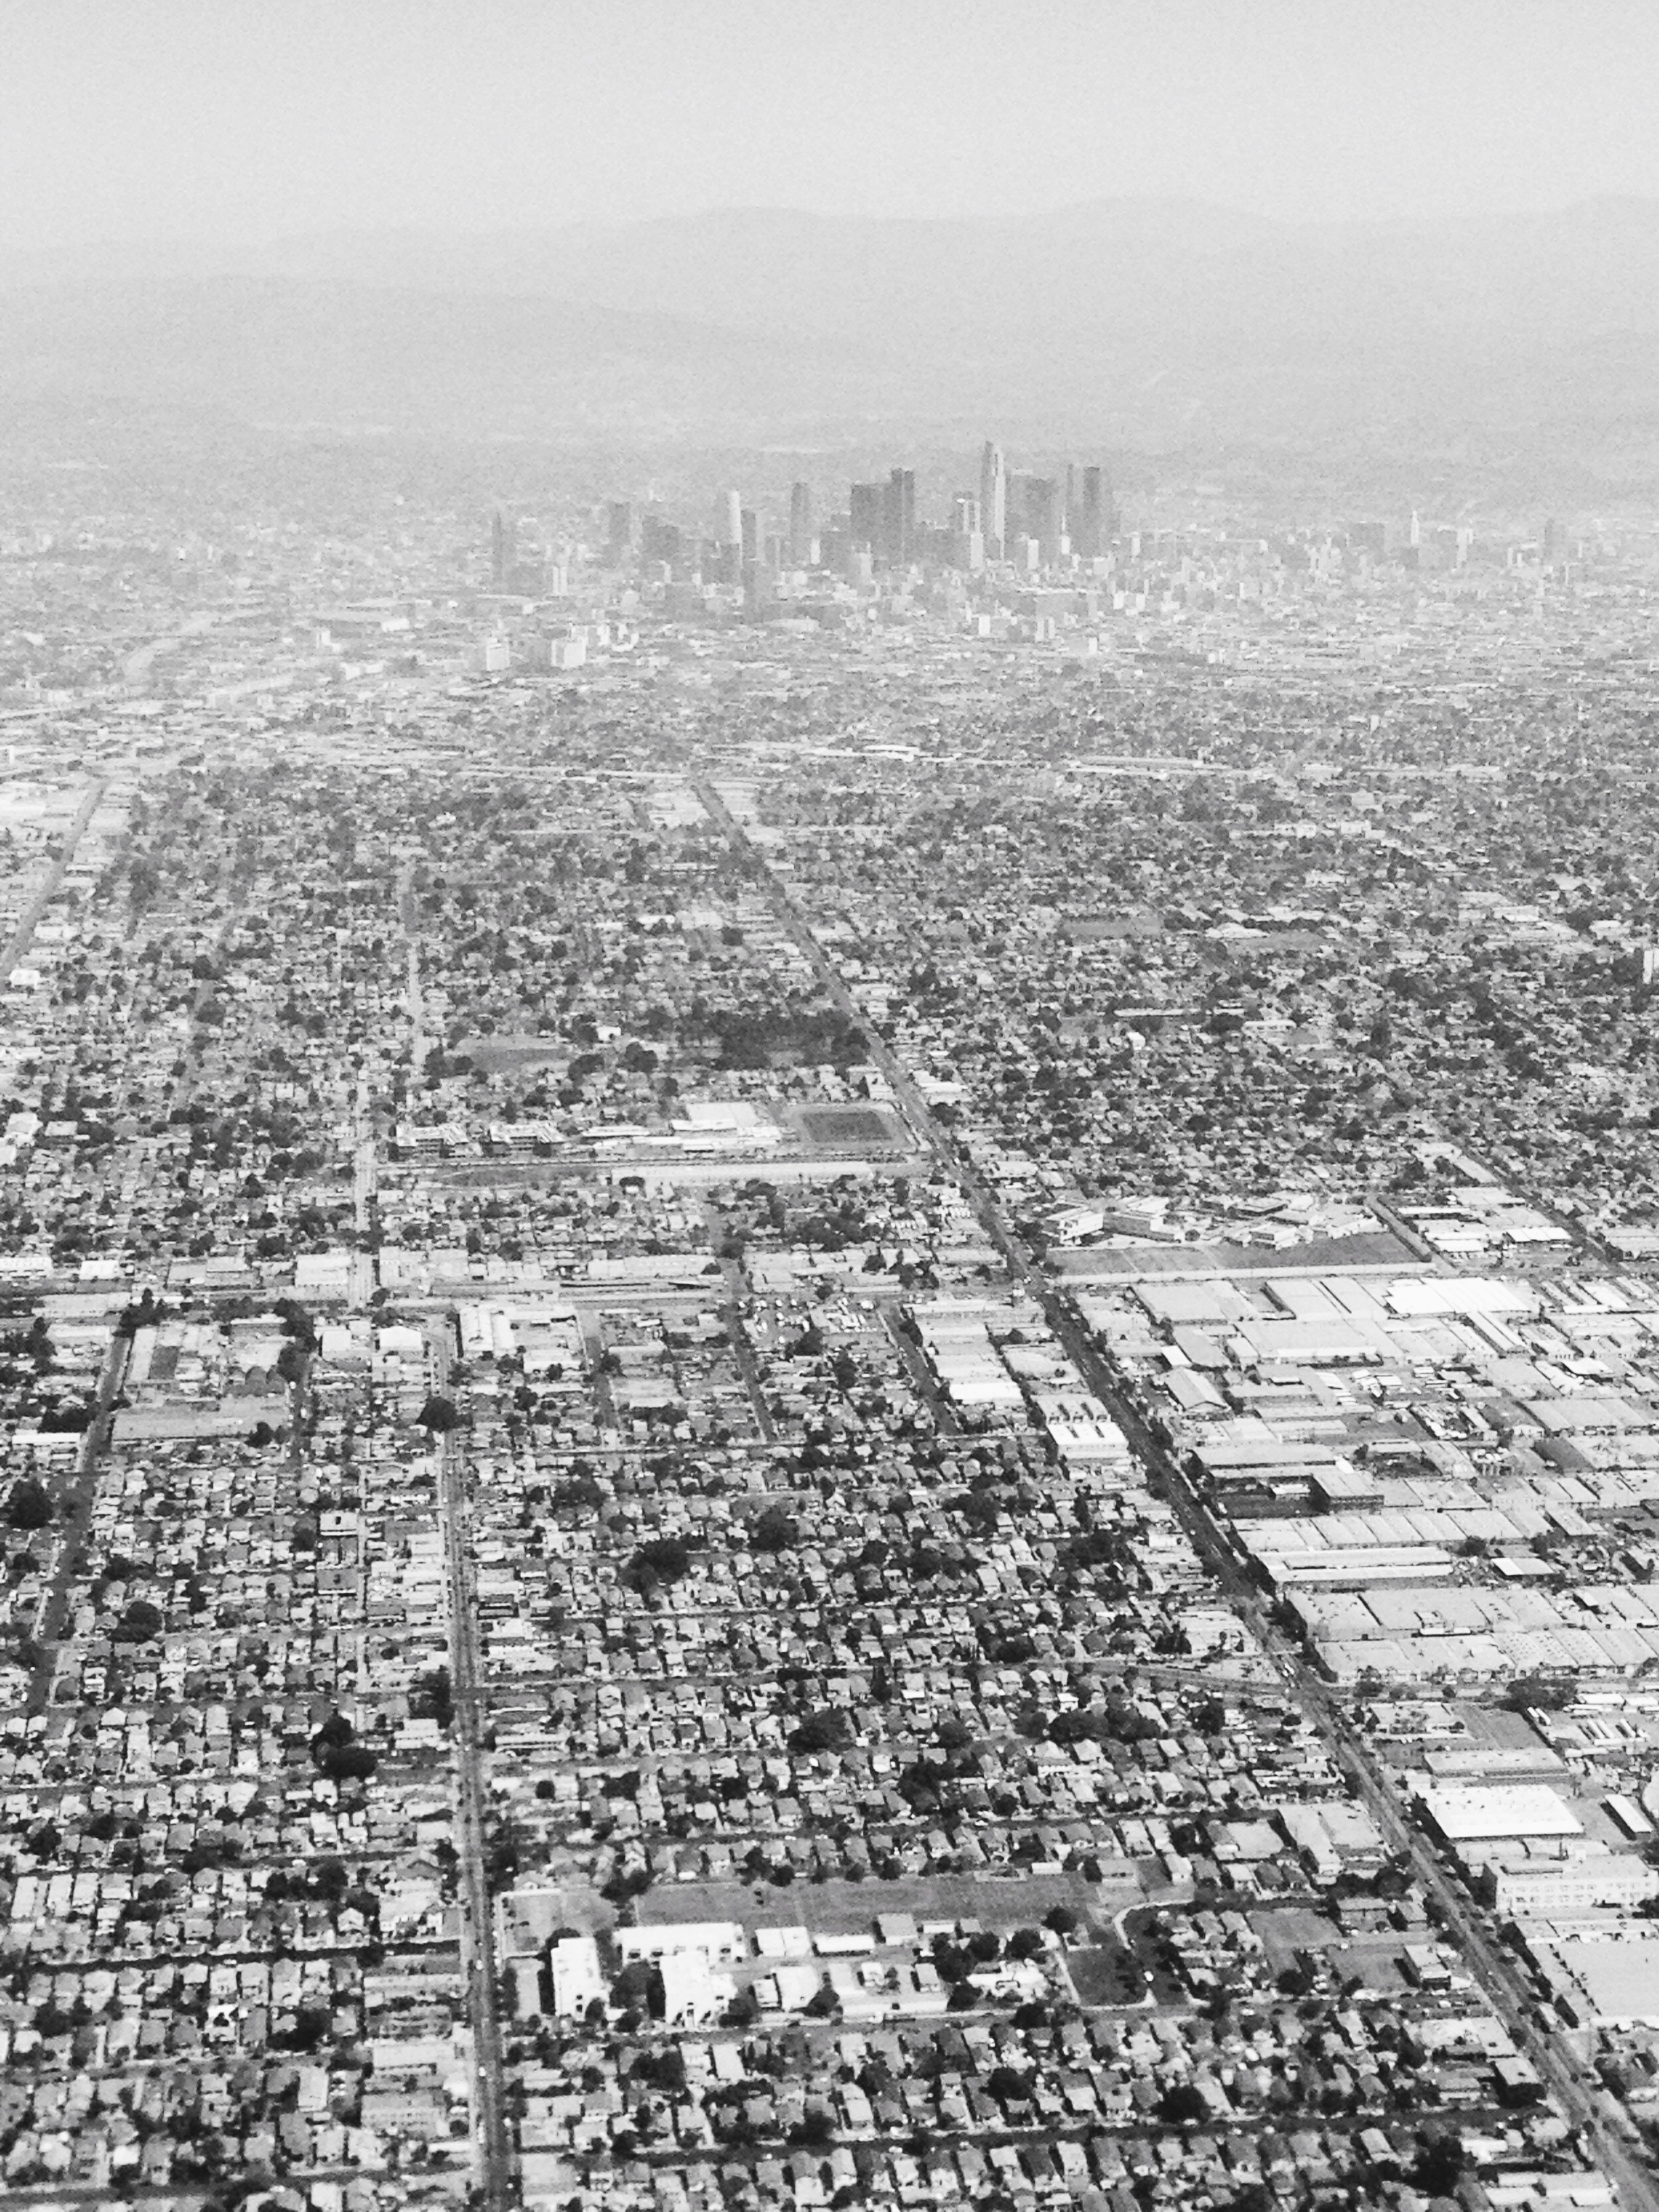  Los Angeles from above. The end of my Indian summer.&nbsp; 